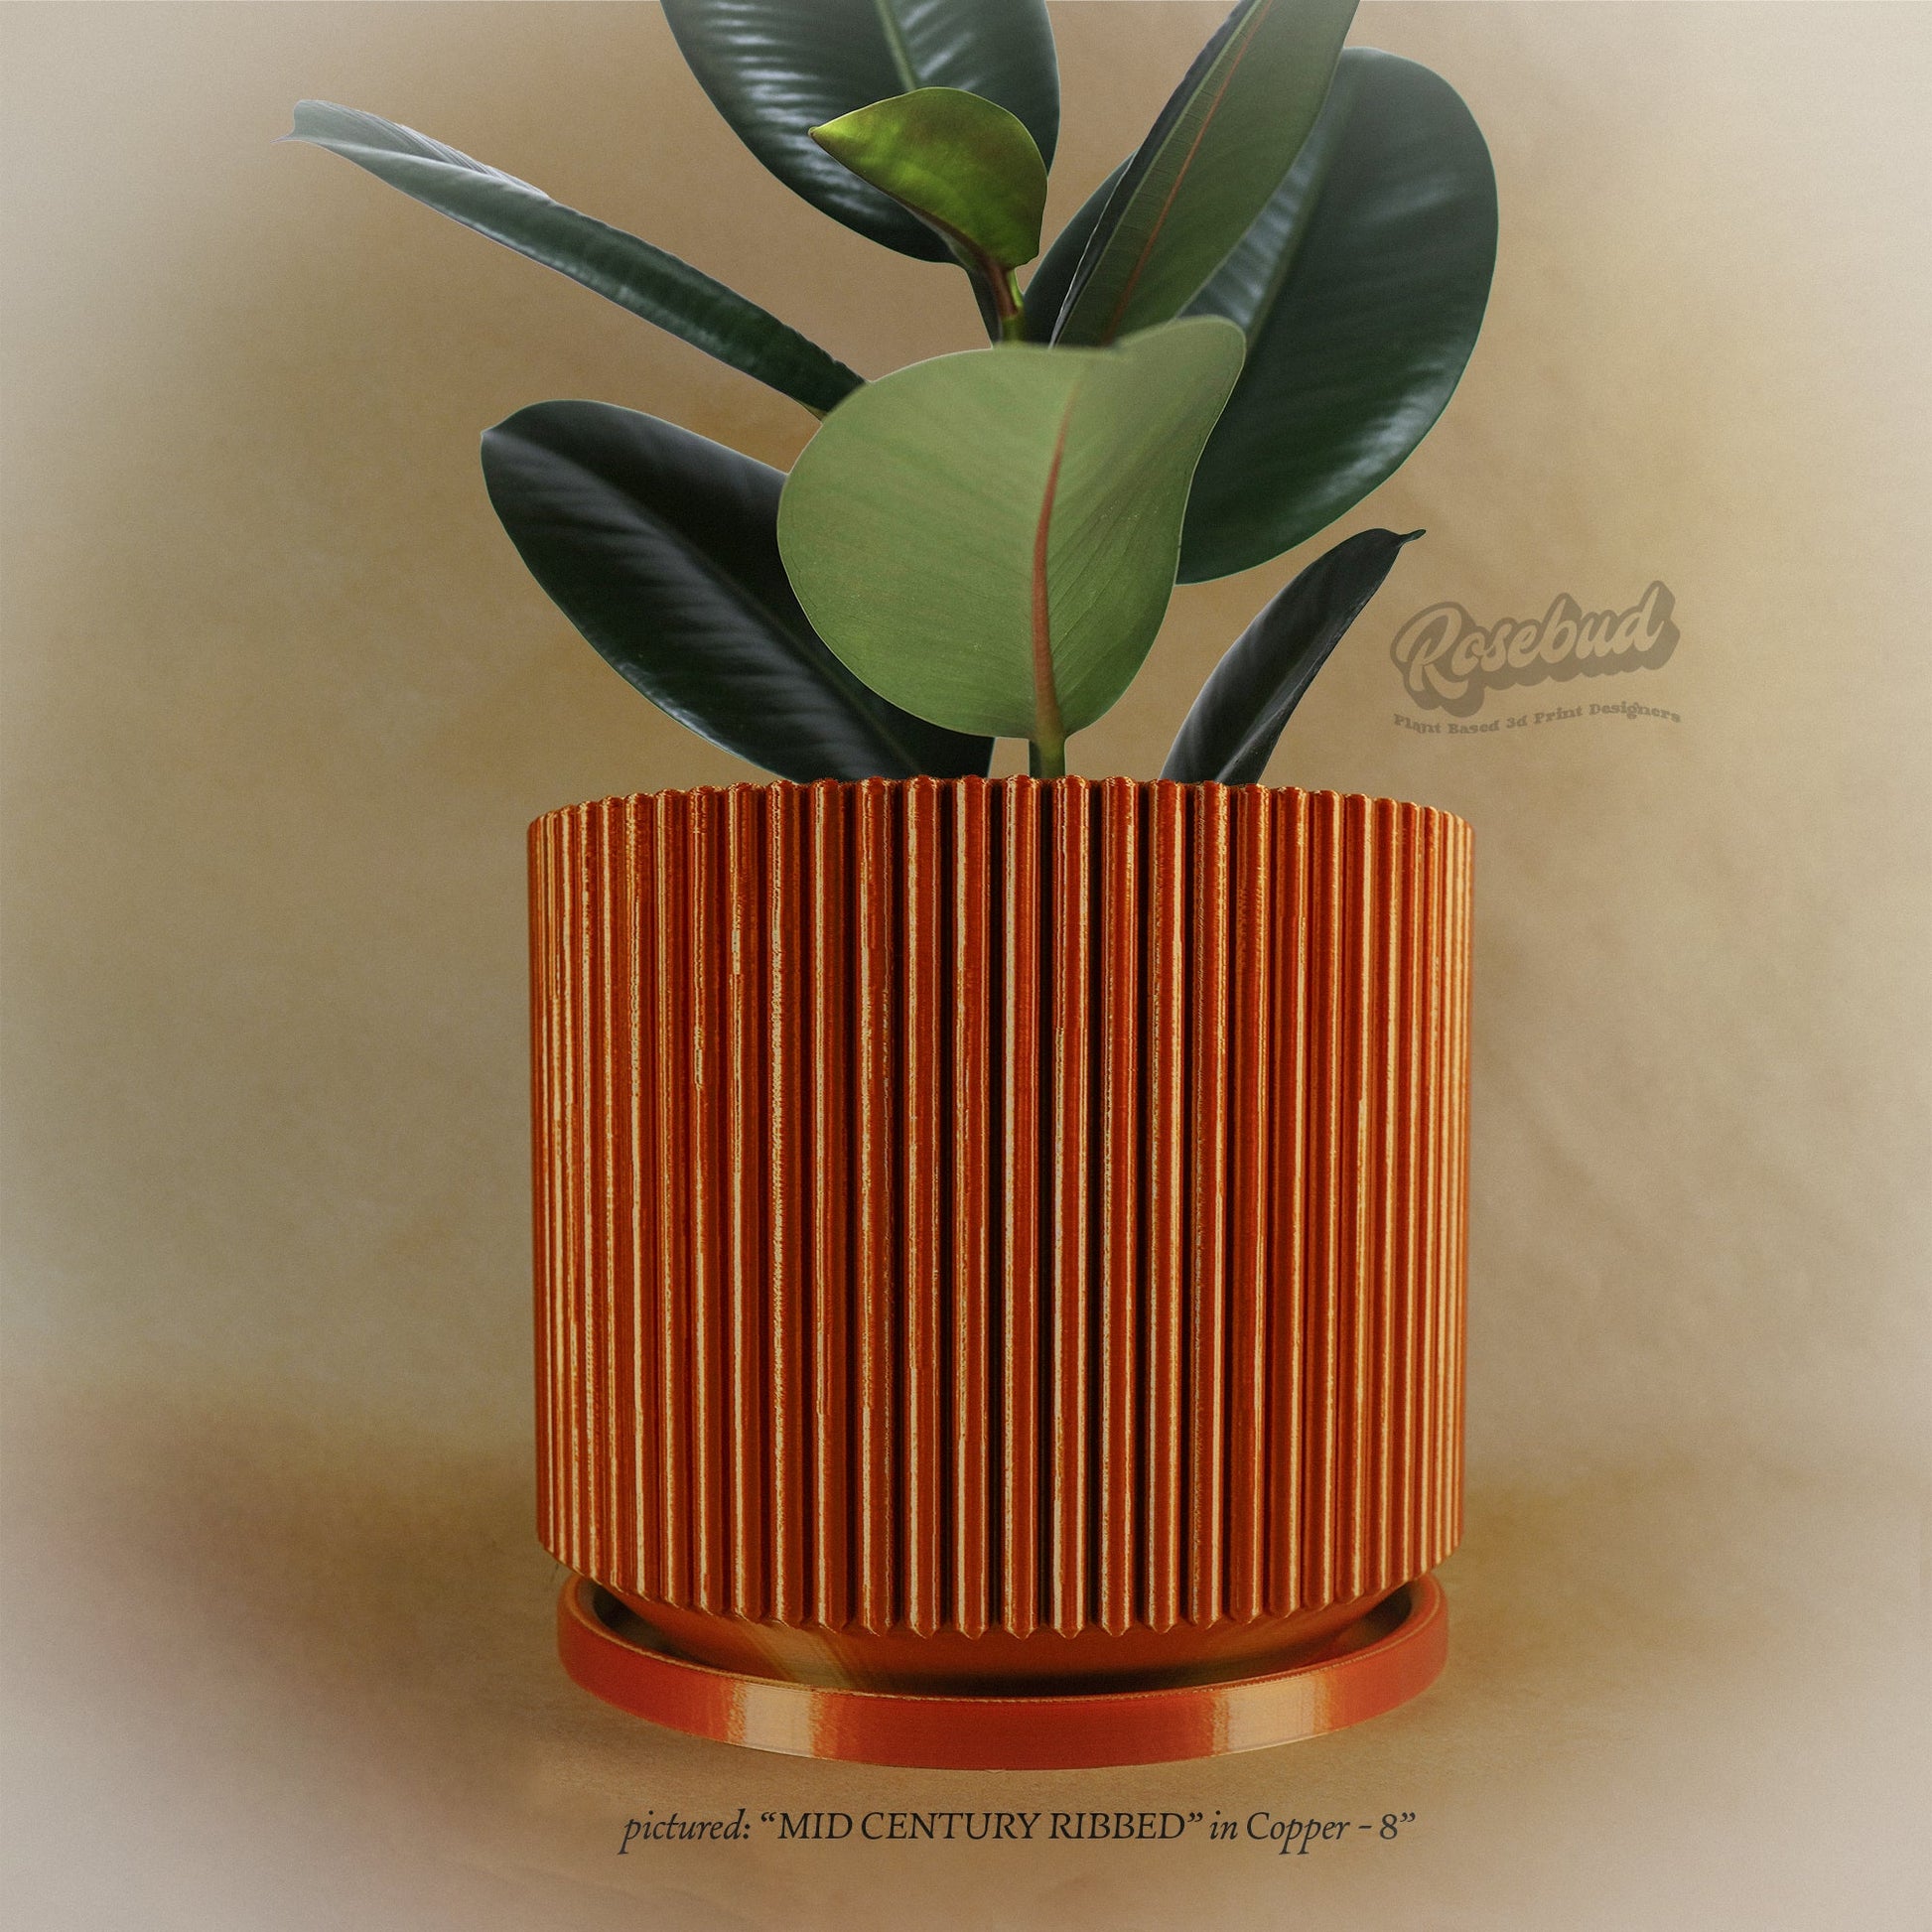 Mid-Century Ribbed Planter - Rosebud HomeGoods Copper 4 With Drip Tray MODERN HOME GOOD